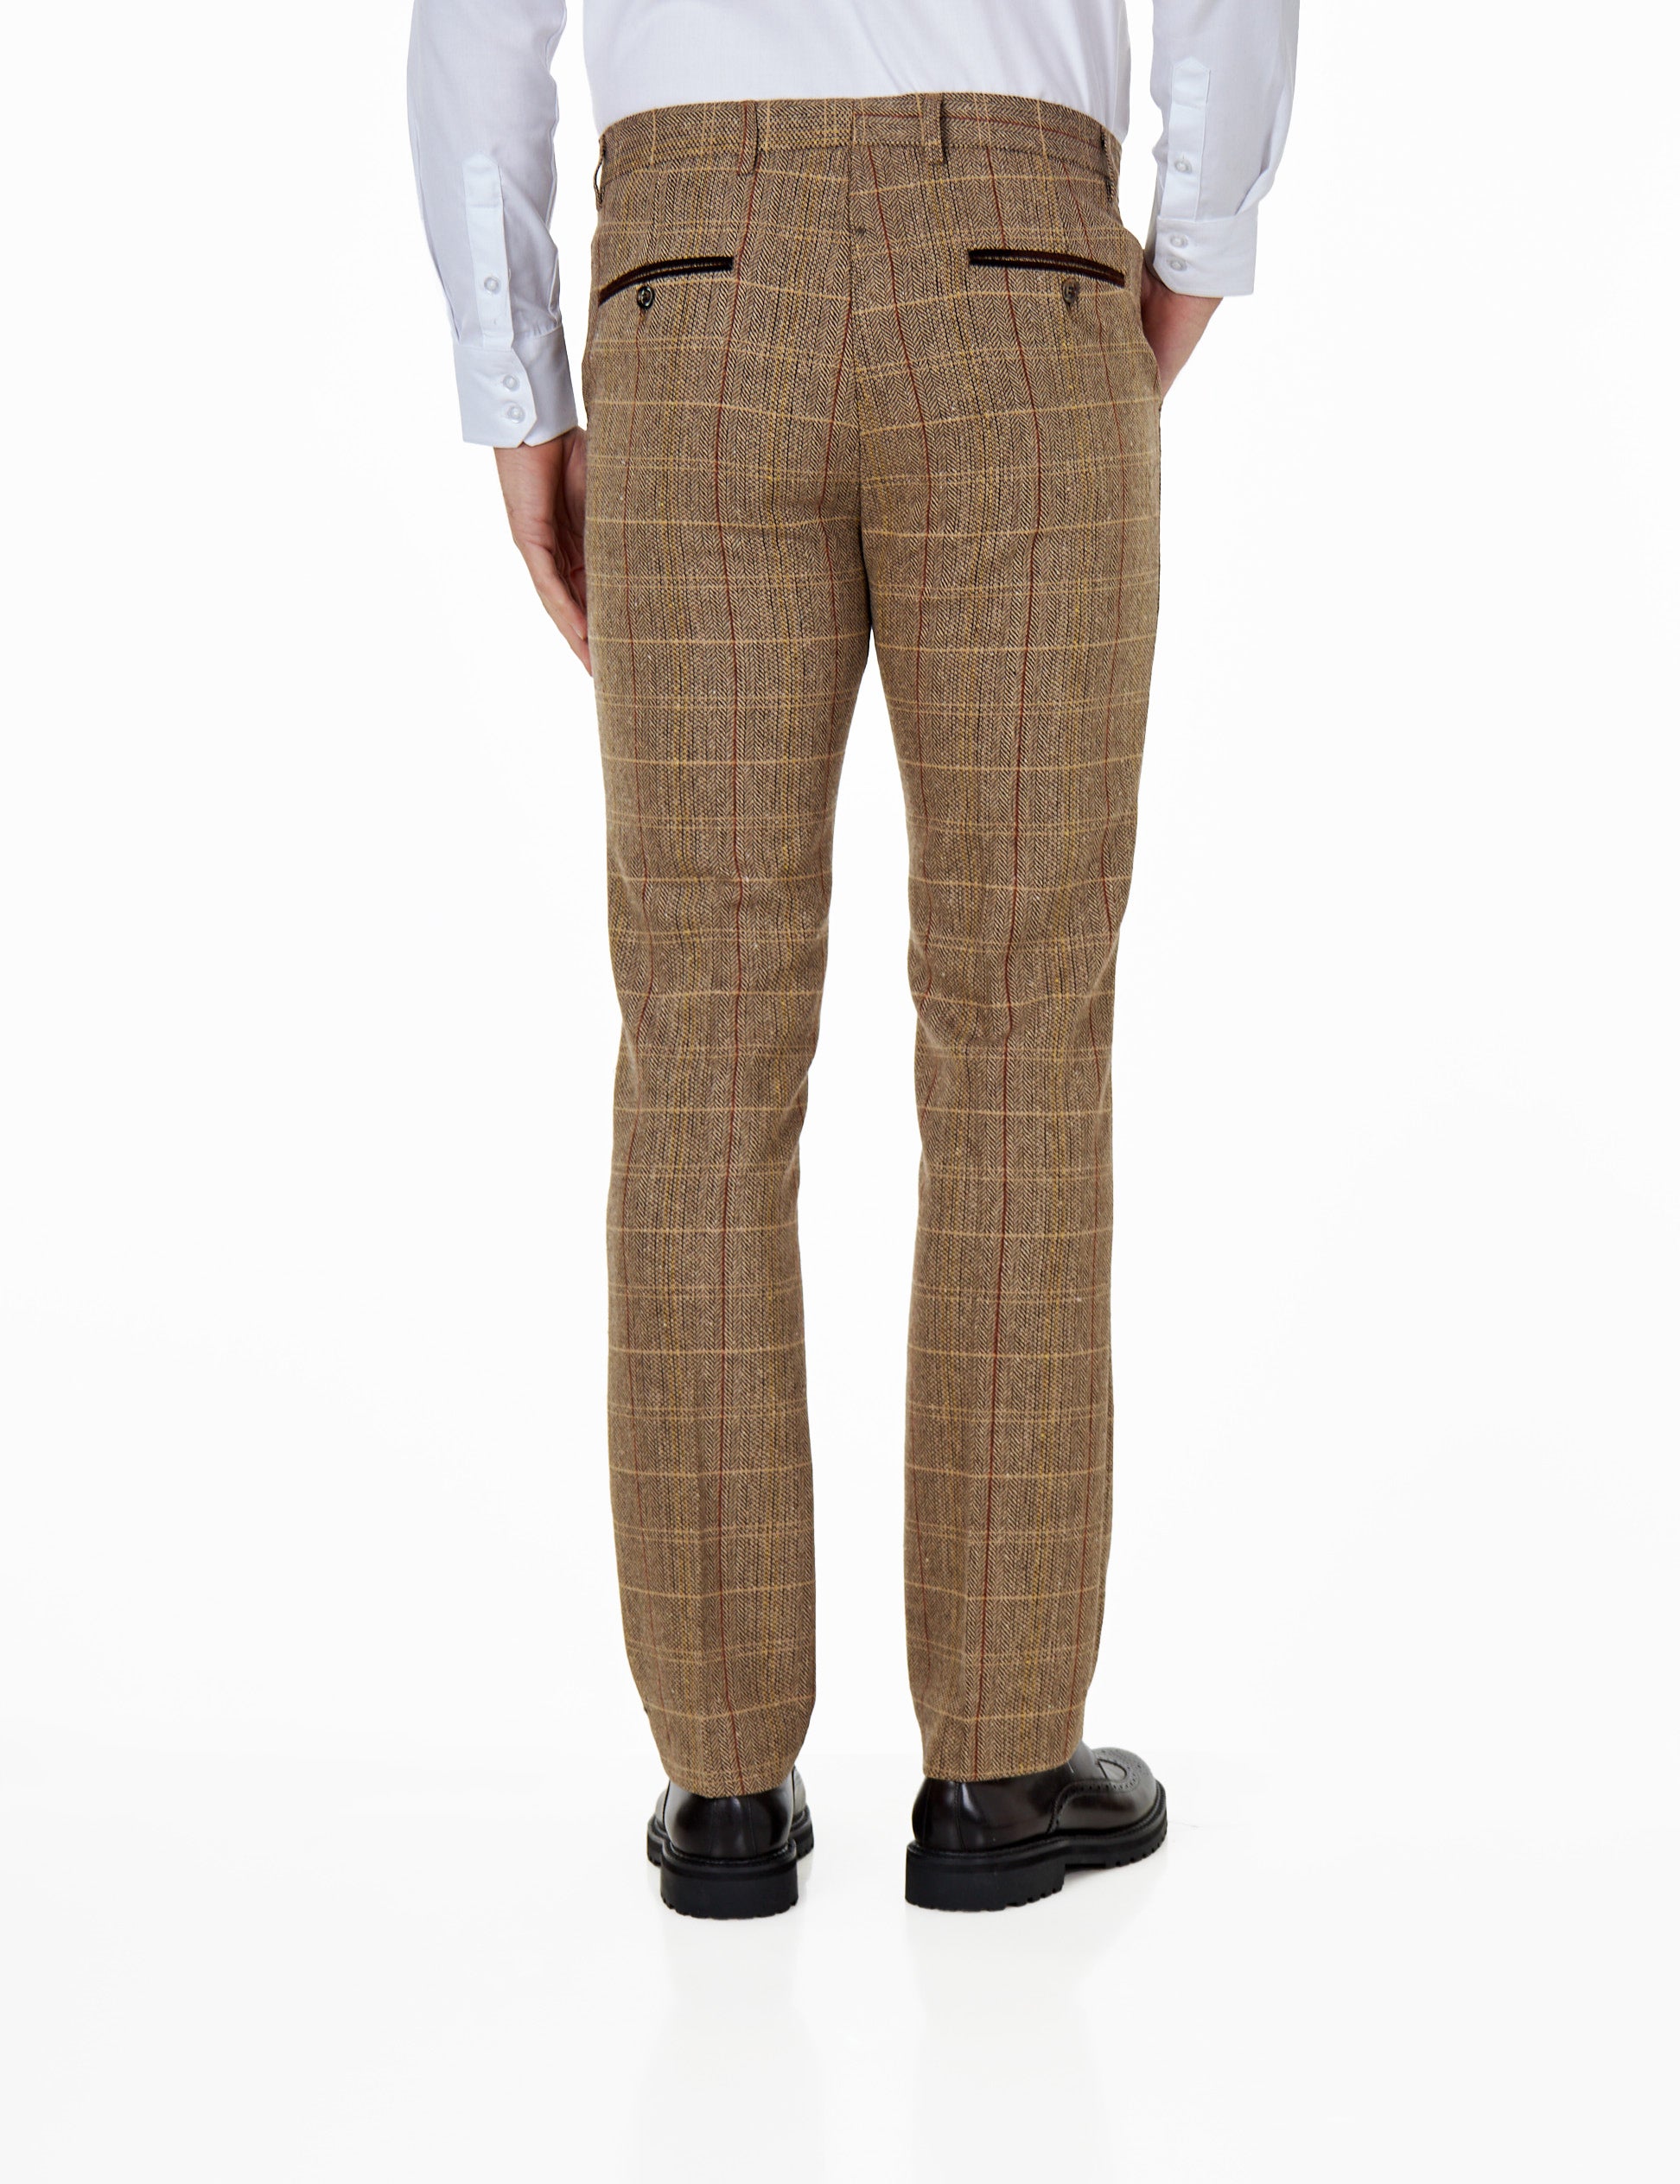 Carlo - Mens Brown Tweed Checks Tailored Fit Trousers